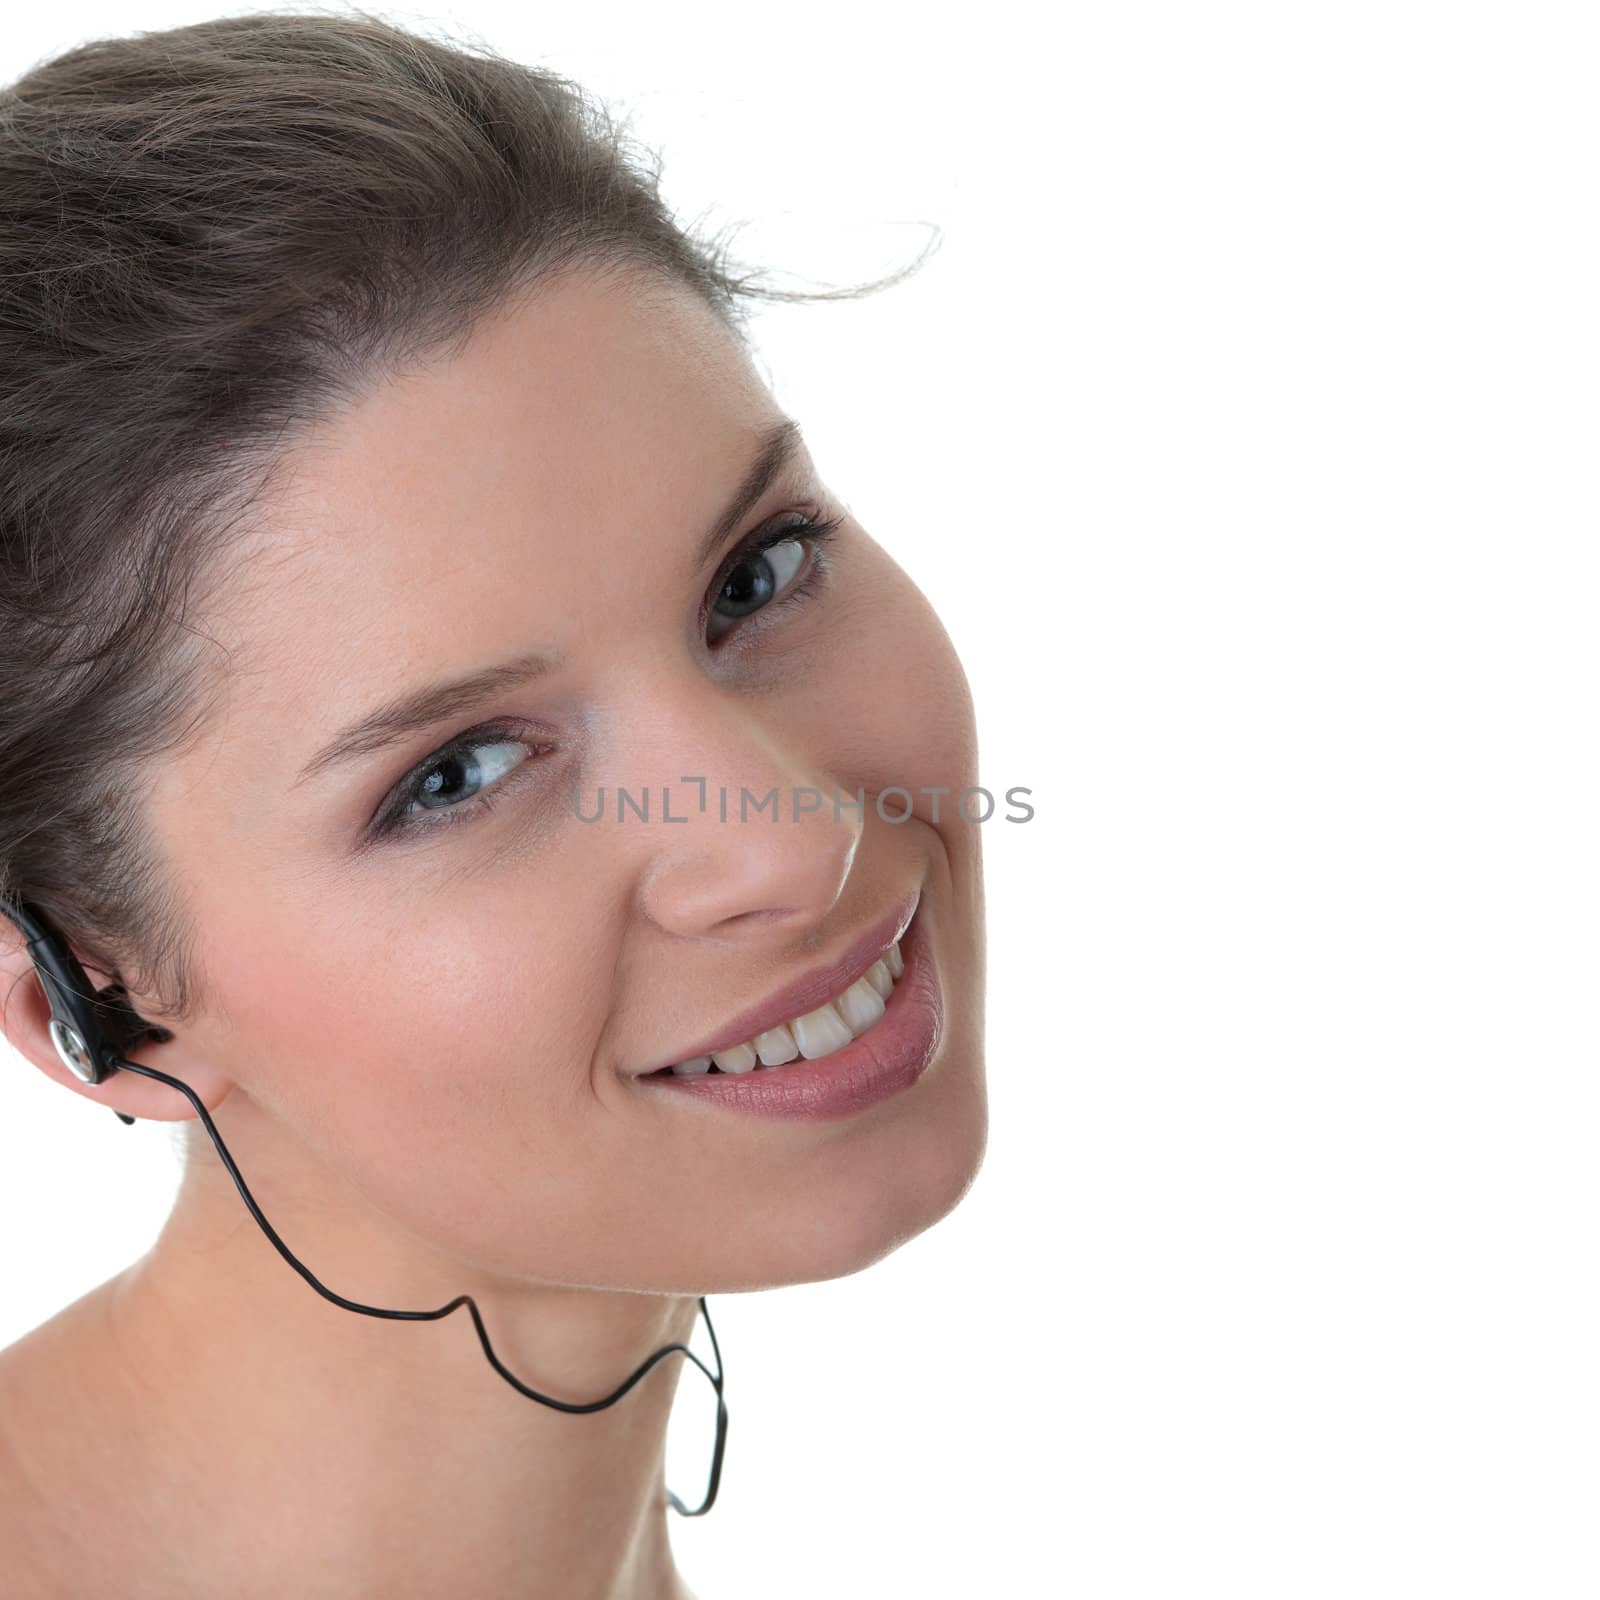 Young fitness woman with sport headphones listening music